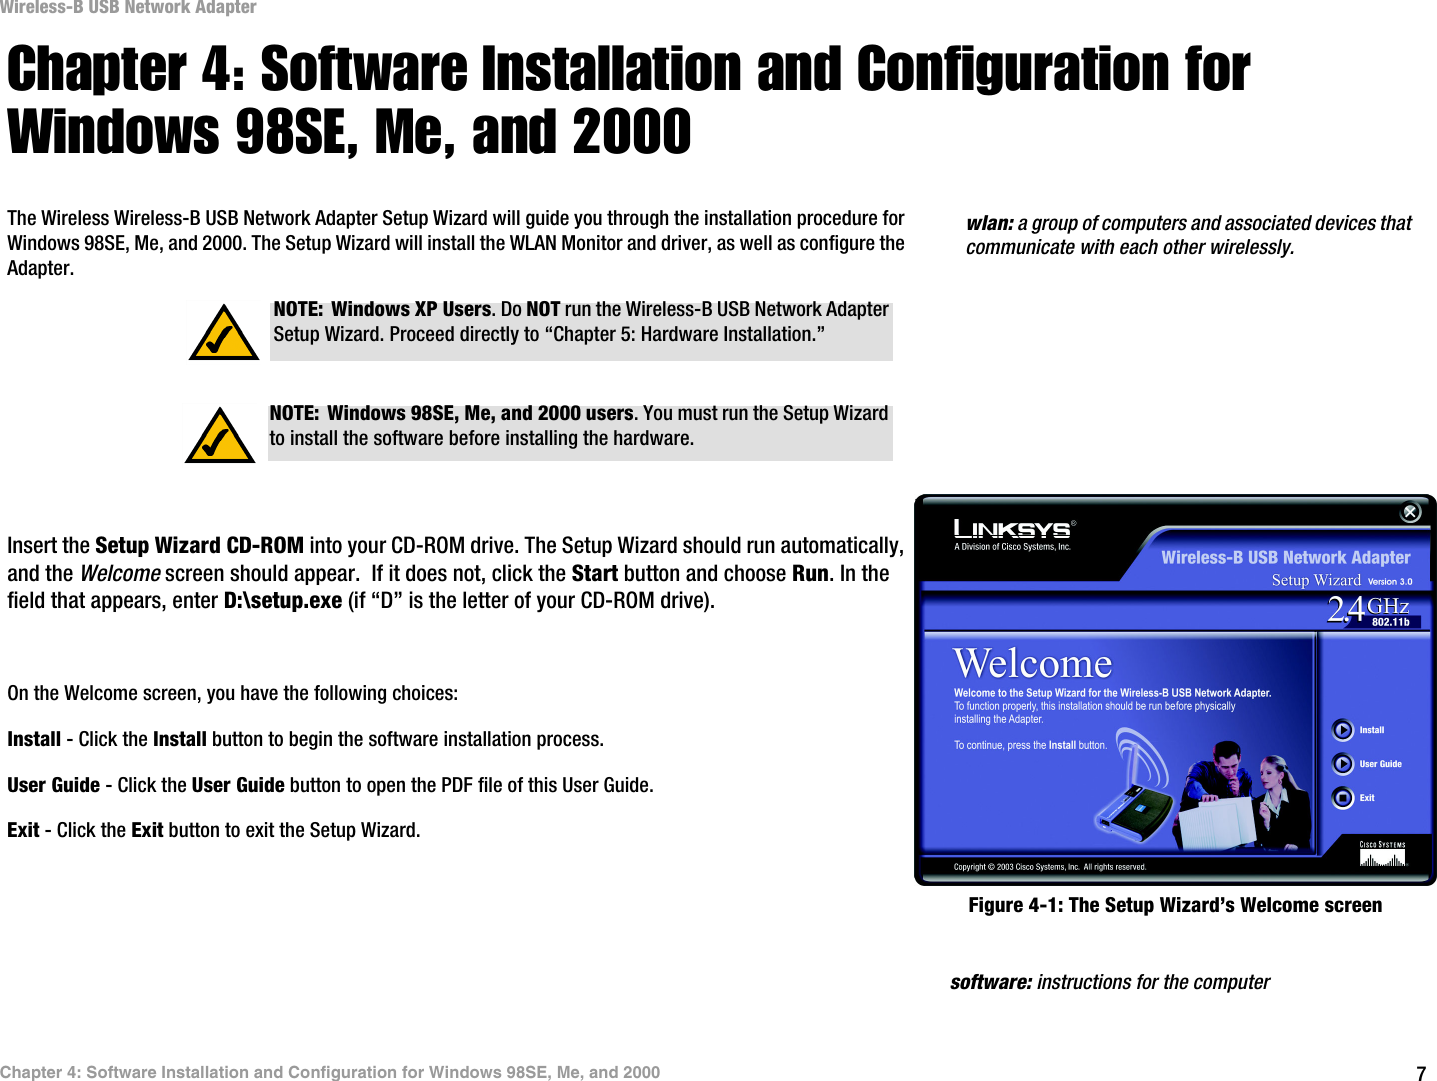 7Chapter 4: Software Installation and Configuration for Windows 98SE, Me, and 2000Wireless-B USB Network AdapterChapter 4: Software Installation and Configuration for Windows 98SE, Me, and 2000The Wireless Wireless-B USB Network Adapter Setup Wizard will guide you through the installation procedure for Windows 98SE, Me, and 2000. The Setup Wizard will install the WLAN Monitor and driver, as well as configure the Adapter.Insert the Setup Wizard CD-ROM into your CD-ROM drive. The Setup Wizard should run automatically, and the Welcome screen should appear.  If it does not, click the Start button and choose Run. In the field that appears, enter D:\setup.exe (if “D” is the letter of your CD-ROM drive). On the Welcome screen, you have the following choices:Install - Click the Install button to begin the software installation process. User Guide - Click the User Guide button to open the PDF file of this User Guide. Exit - Click the Exit button to exit the Setup Wizard. software: instructions for the computerNOTE: Windows XP Users. Do NOT run the Wireless-B USB Network Adapter Setup Wizard. Proceed directly to “Chapter 5: Hardware Installation.”NOTE: Windows 98SE, Me, and 2000 users. You must run the Setup Wizard to install the software before installing the hardware.Figure 4-1: The Setup Wizard’s Welcome screenwlan: a group of computers and associated devices that communicate with each other wirelessly.